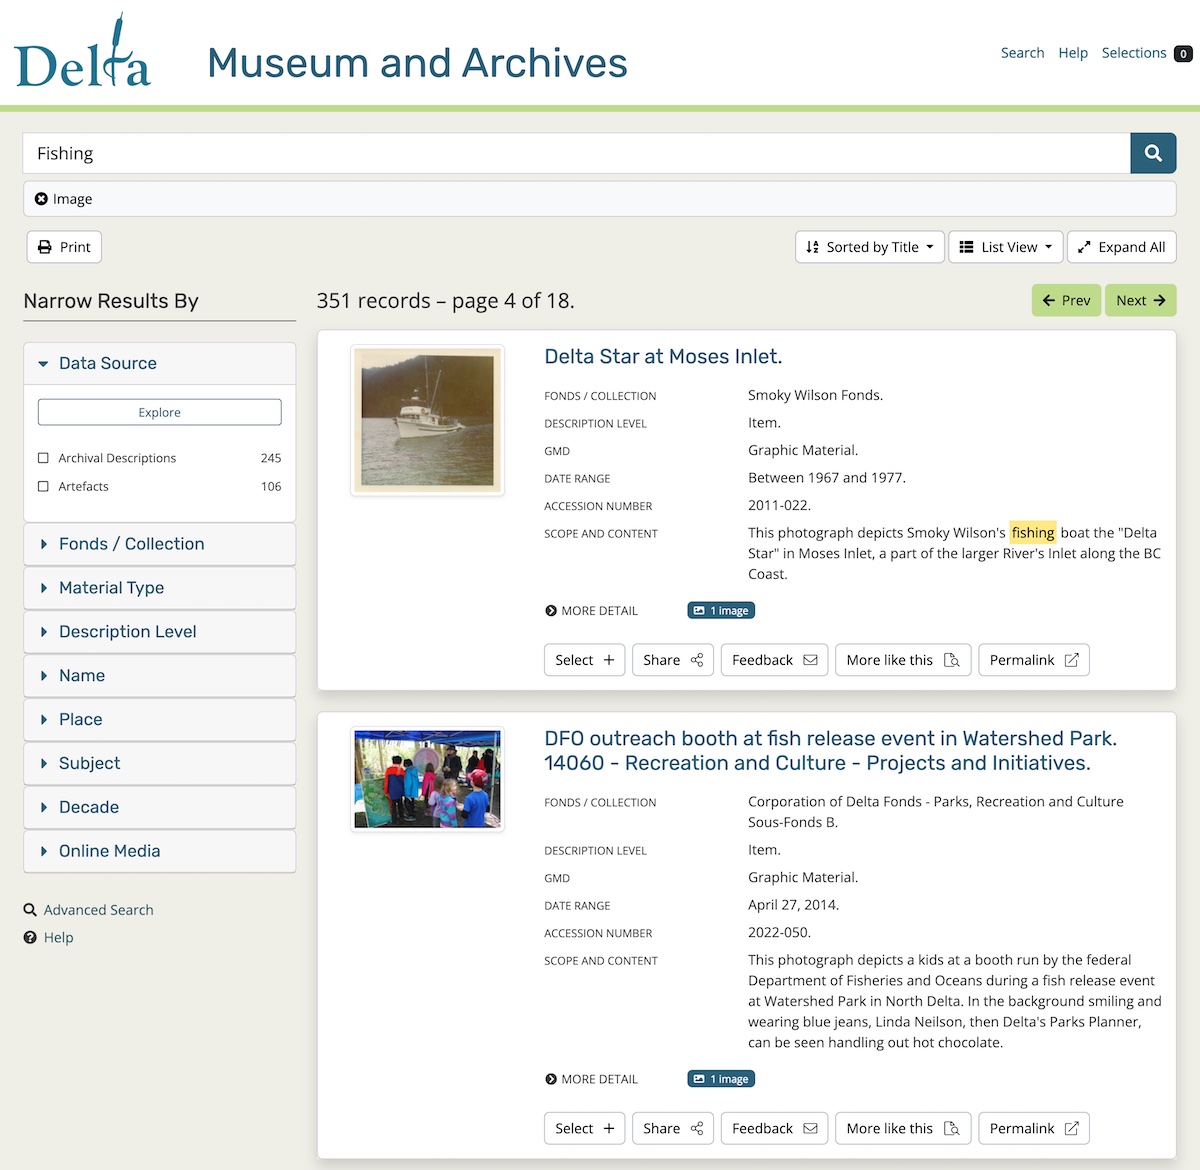 Delta Museum and Archives Search Results